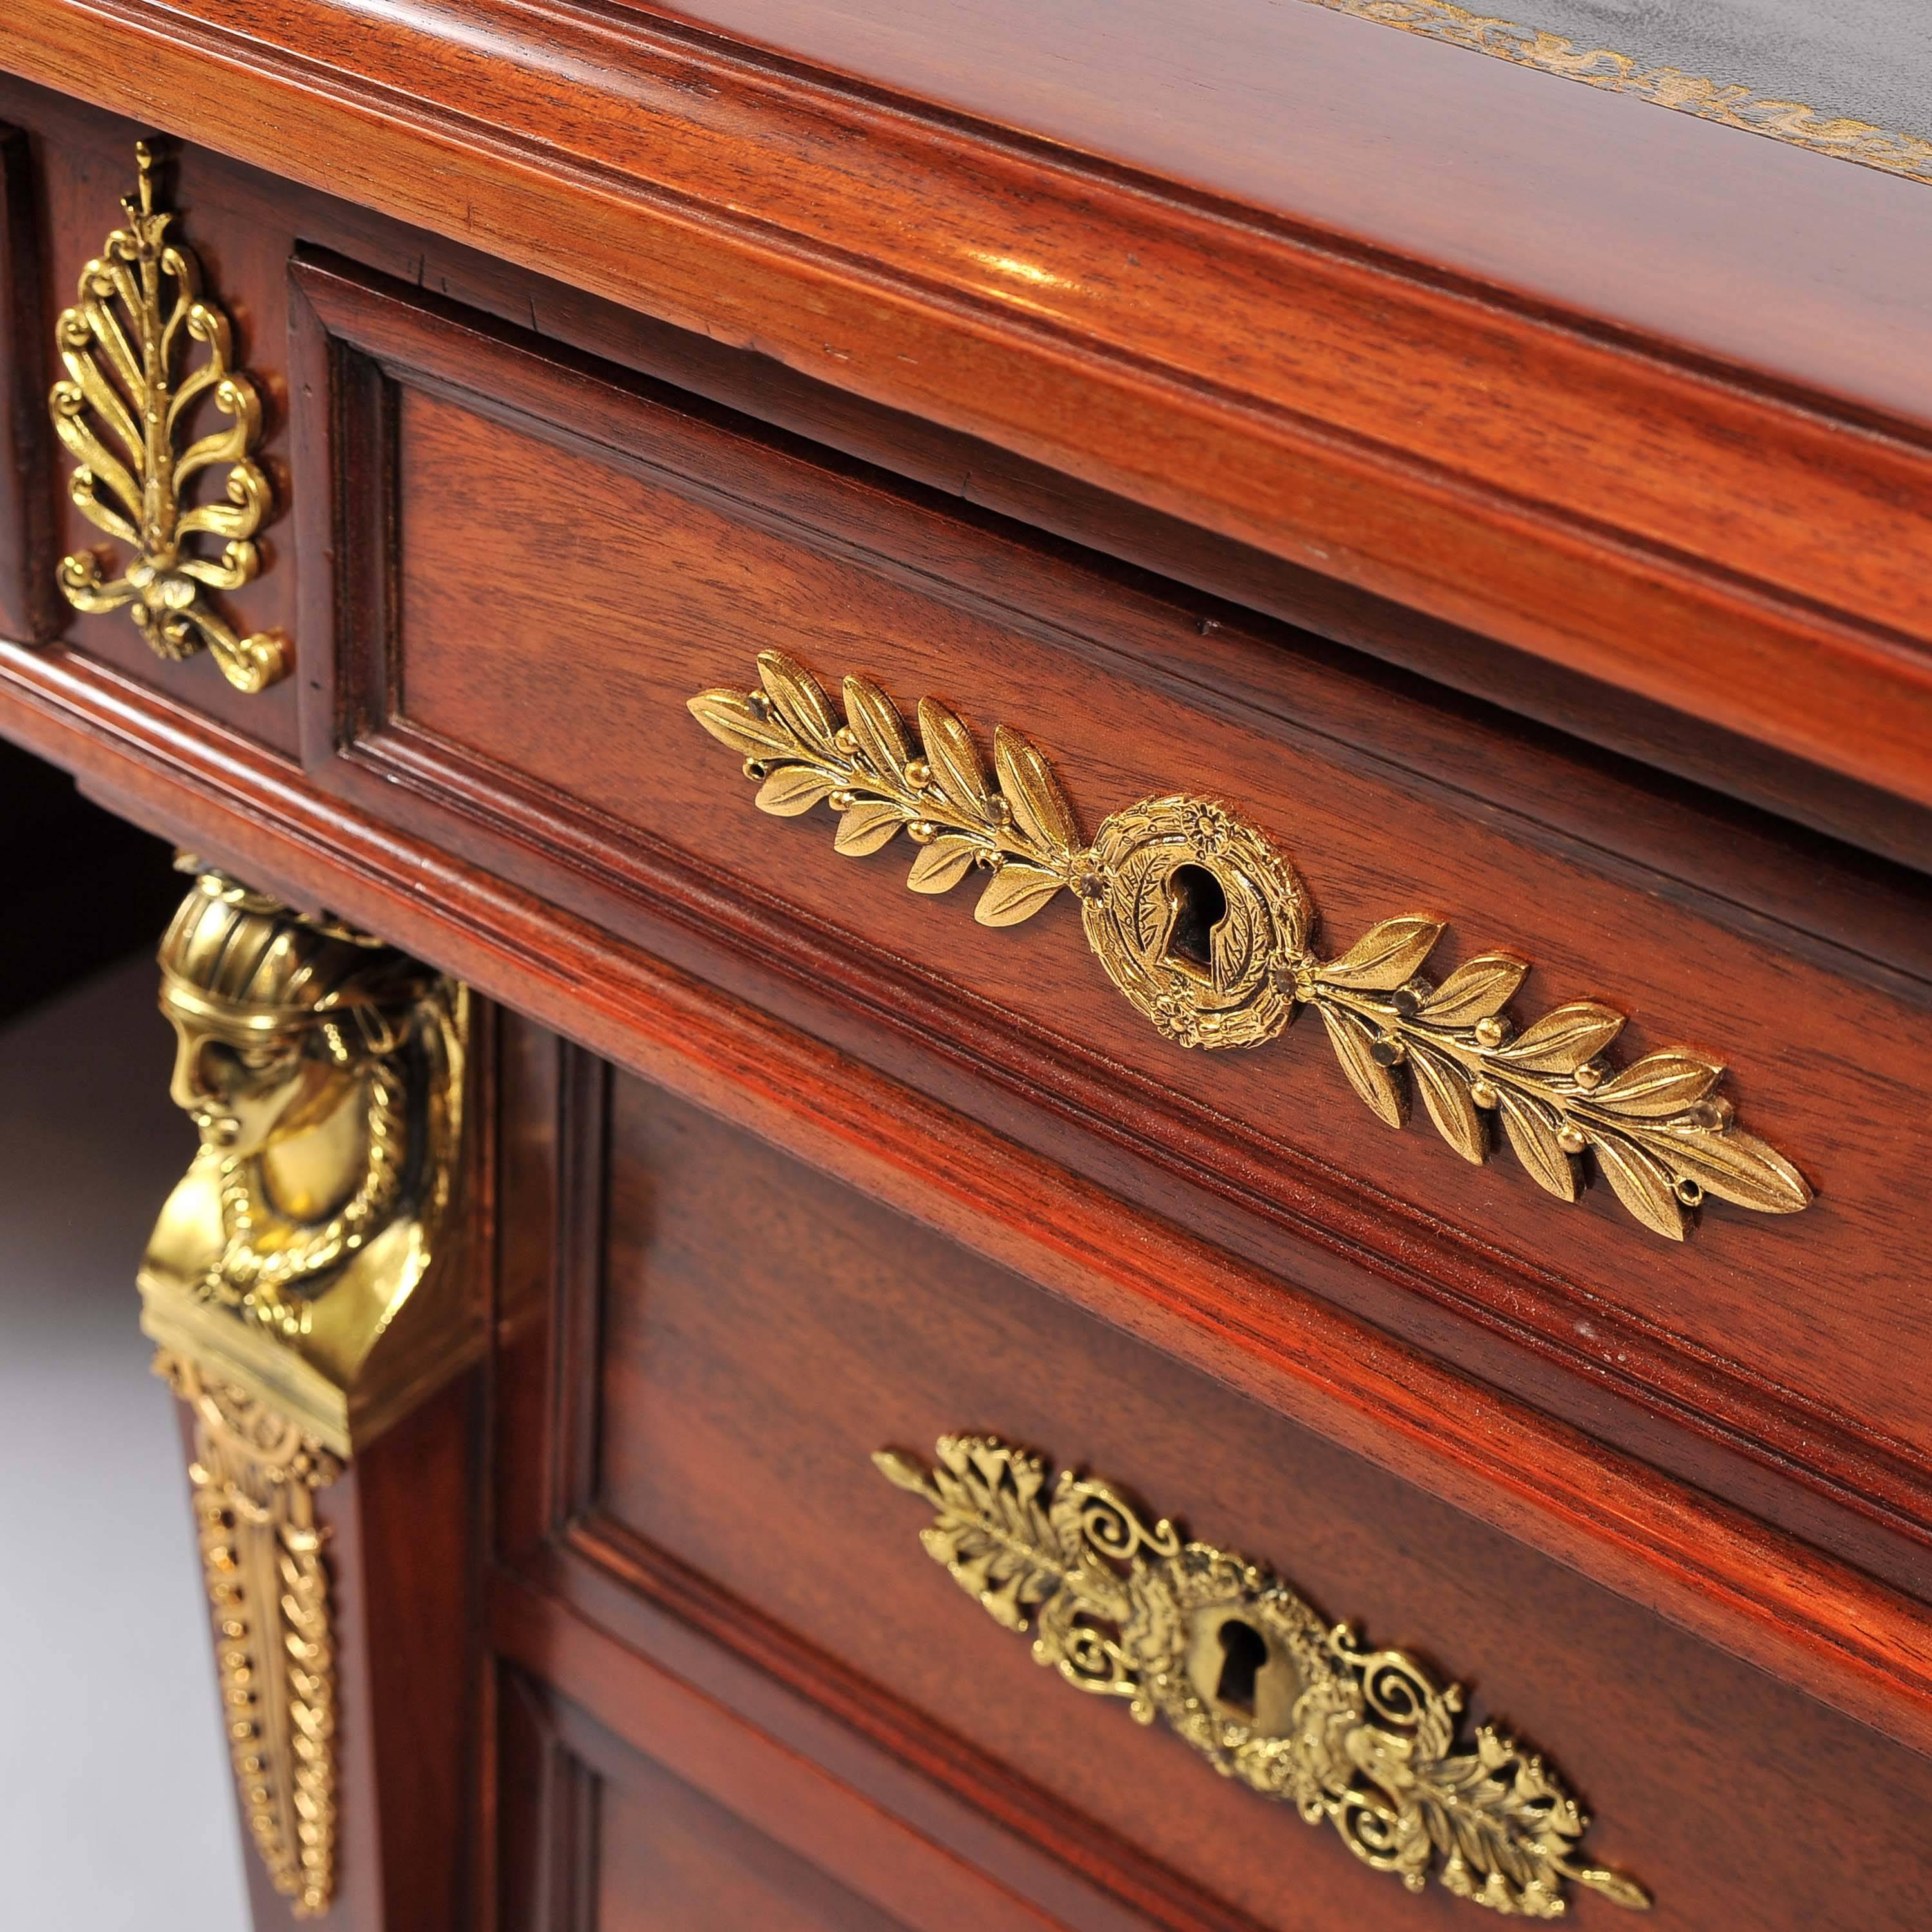 19th Century Ormolu-Mounted Mahogany Pedestal Desk in the Empire Style For Sale